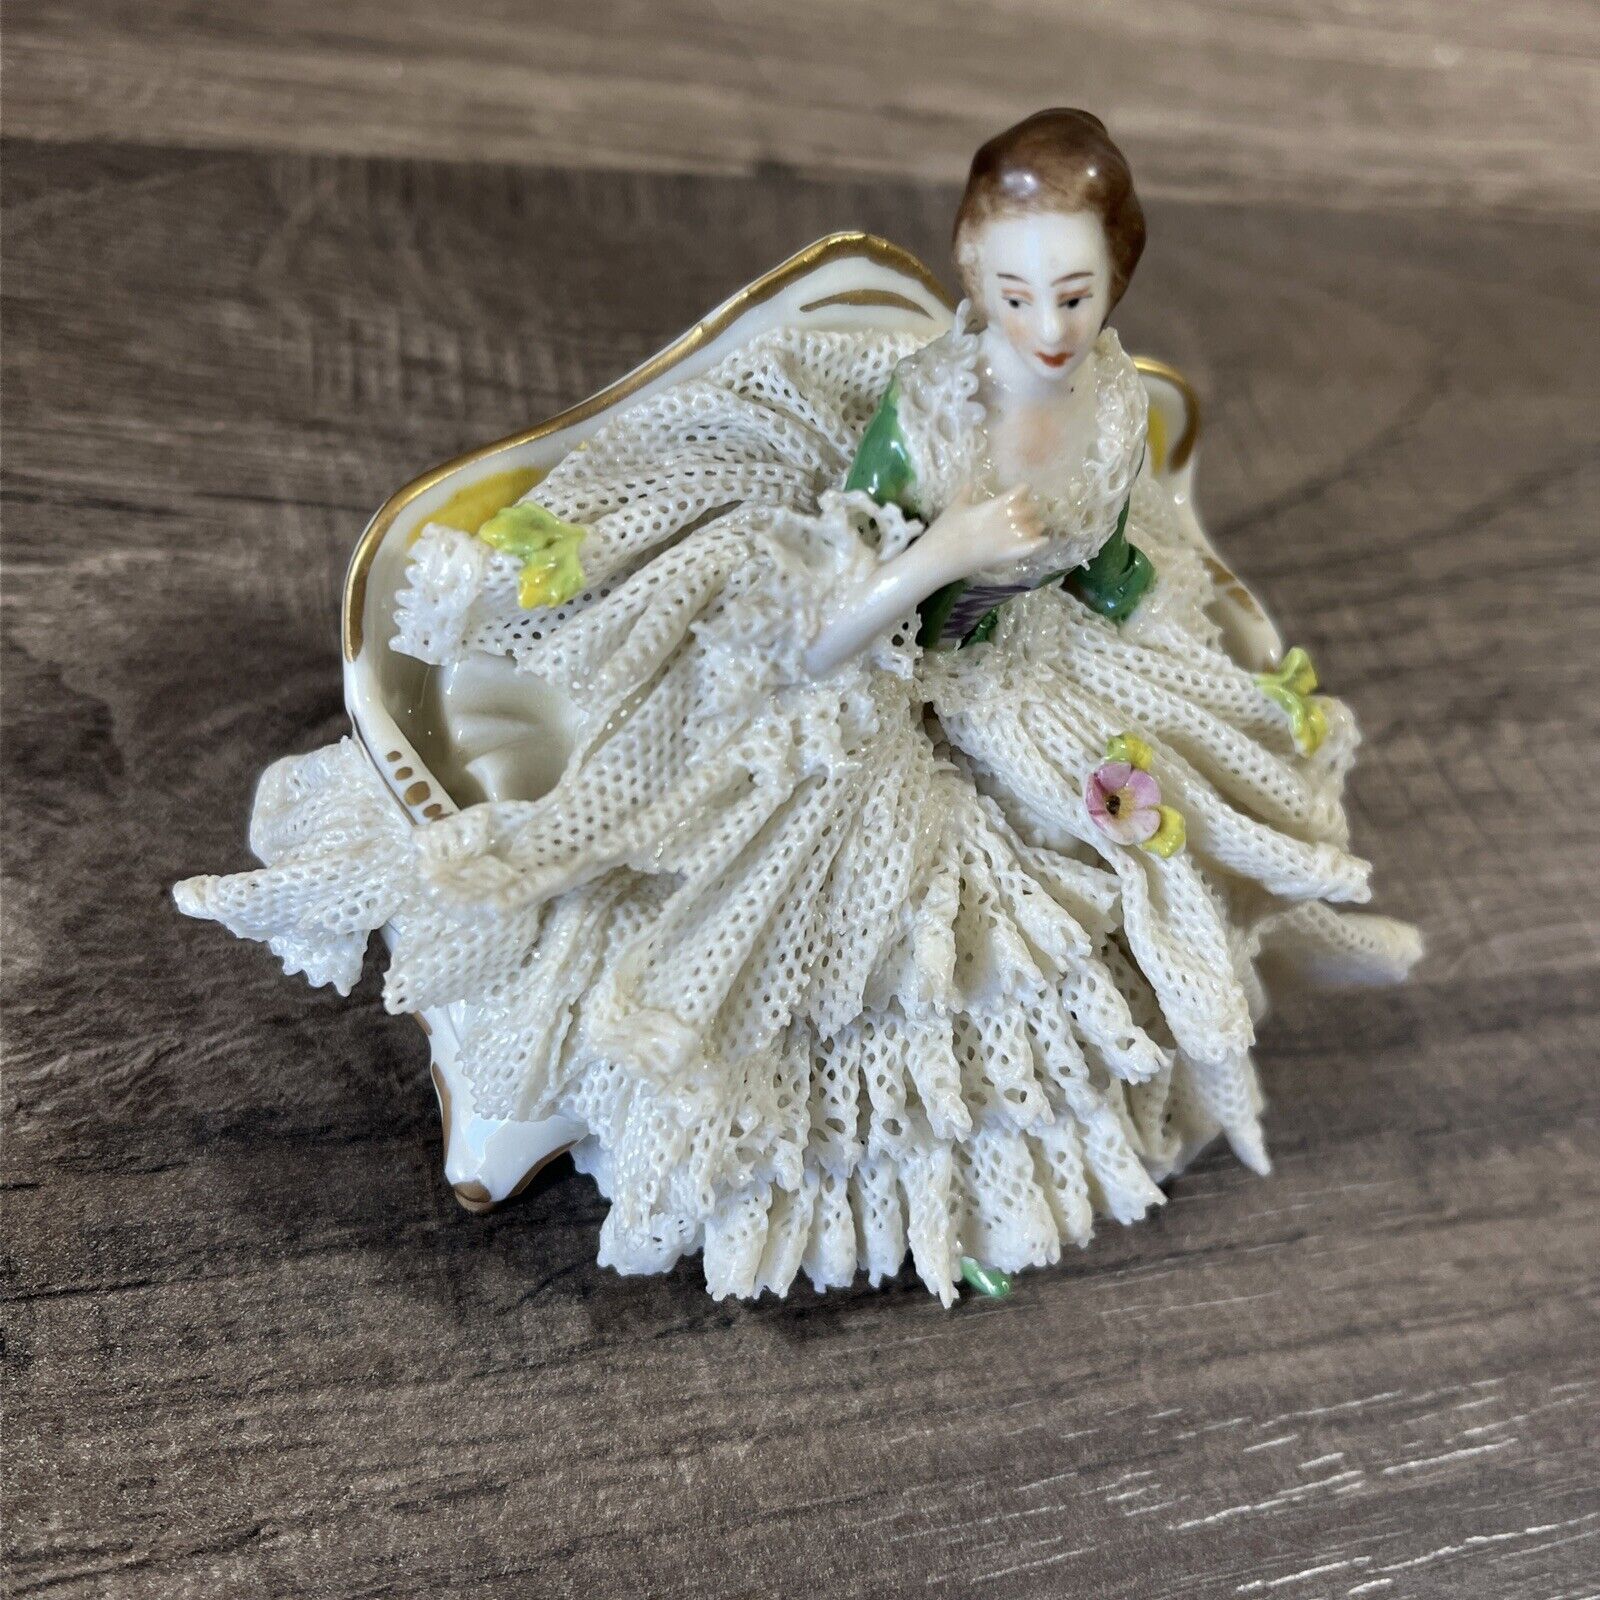 Vintage Dresden Lace Porcelain Victorian Lady sitting on Couch Figurine Germany